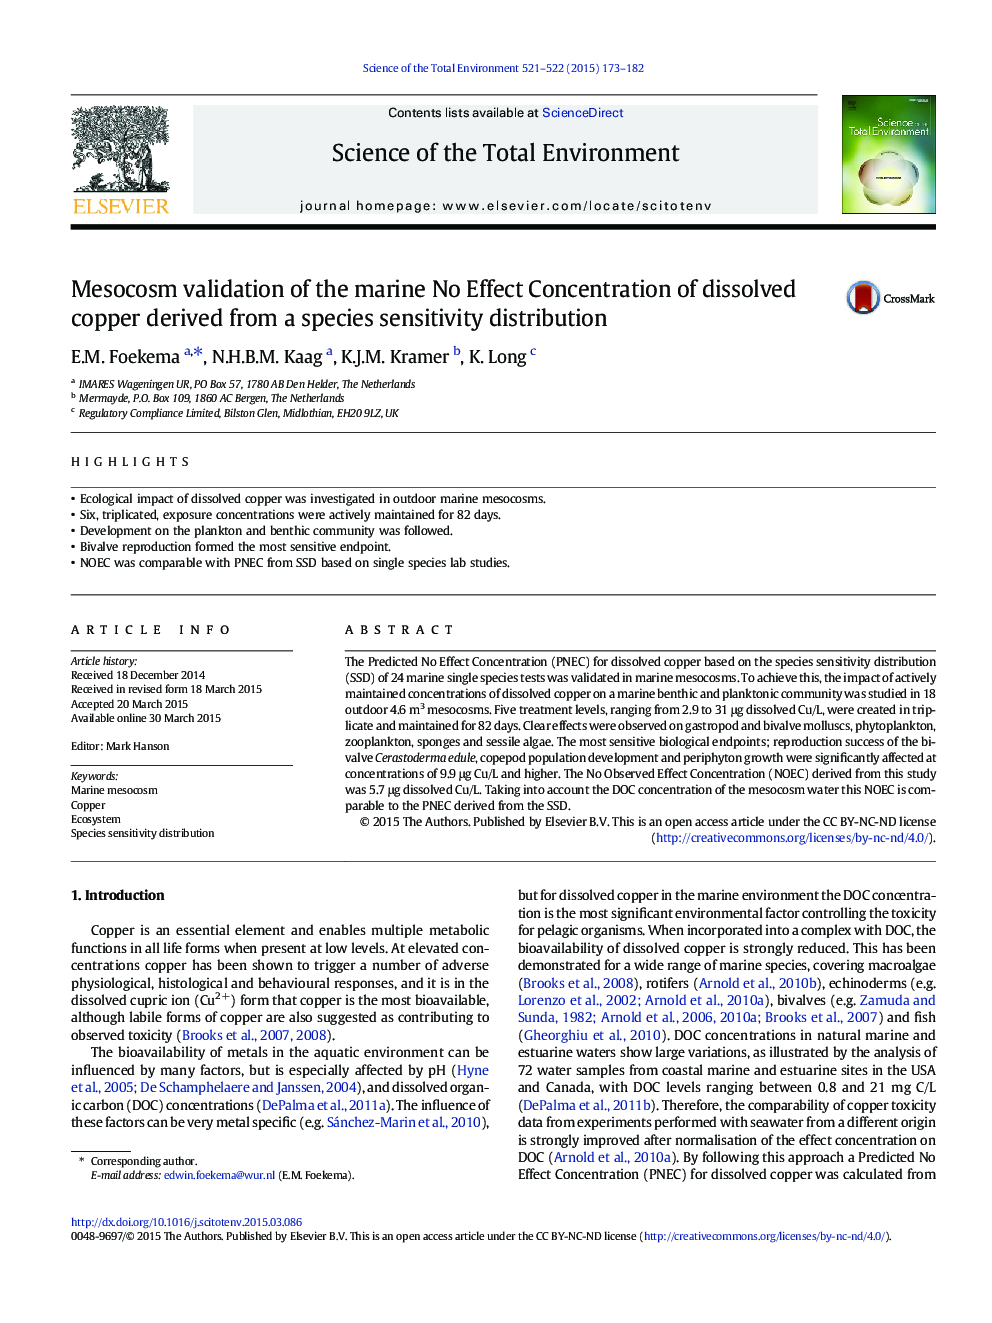 Mesocosm validation of the marine No Effect Concentration of dissolved copper derived from a species sensitivity distribution